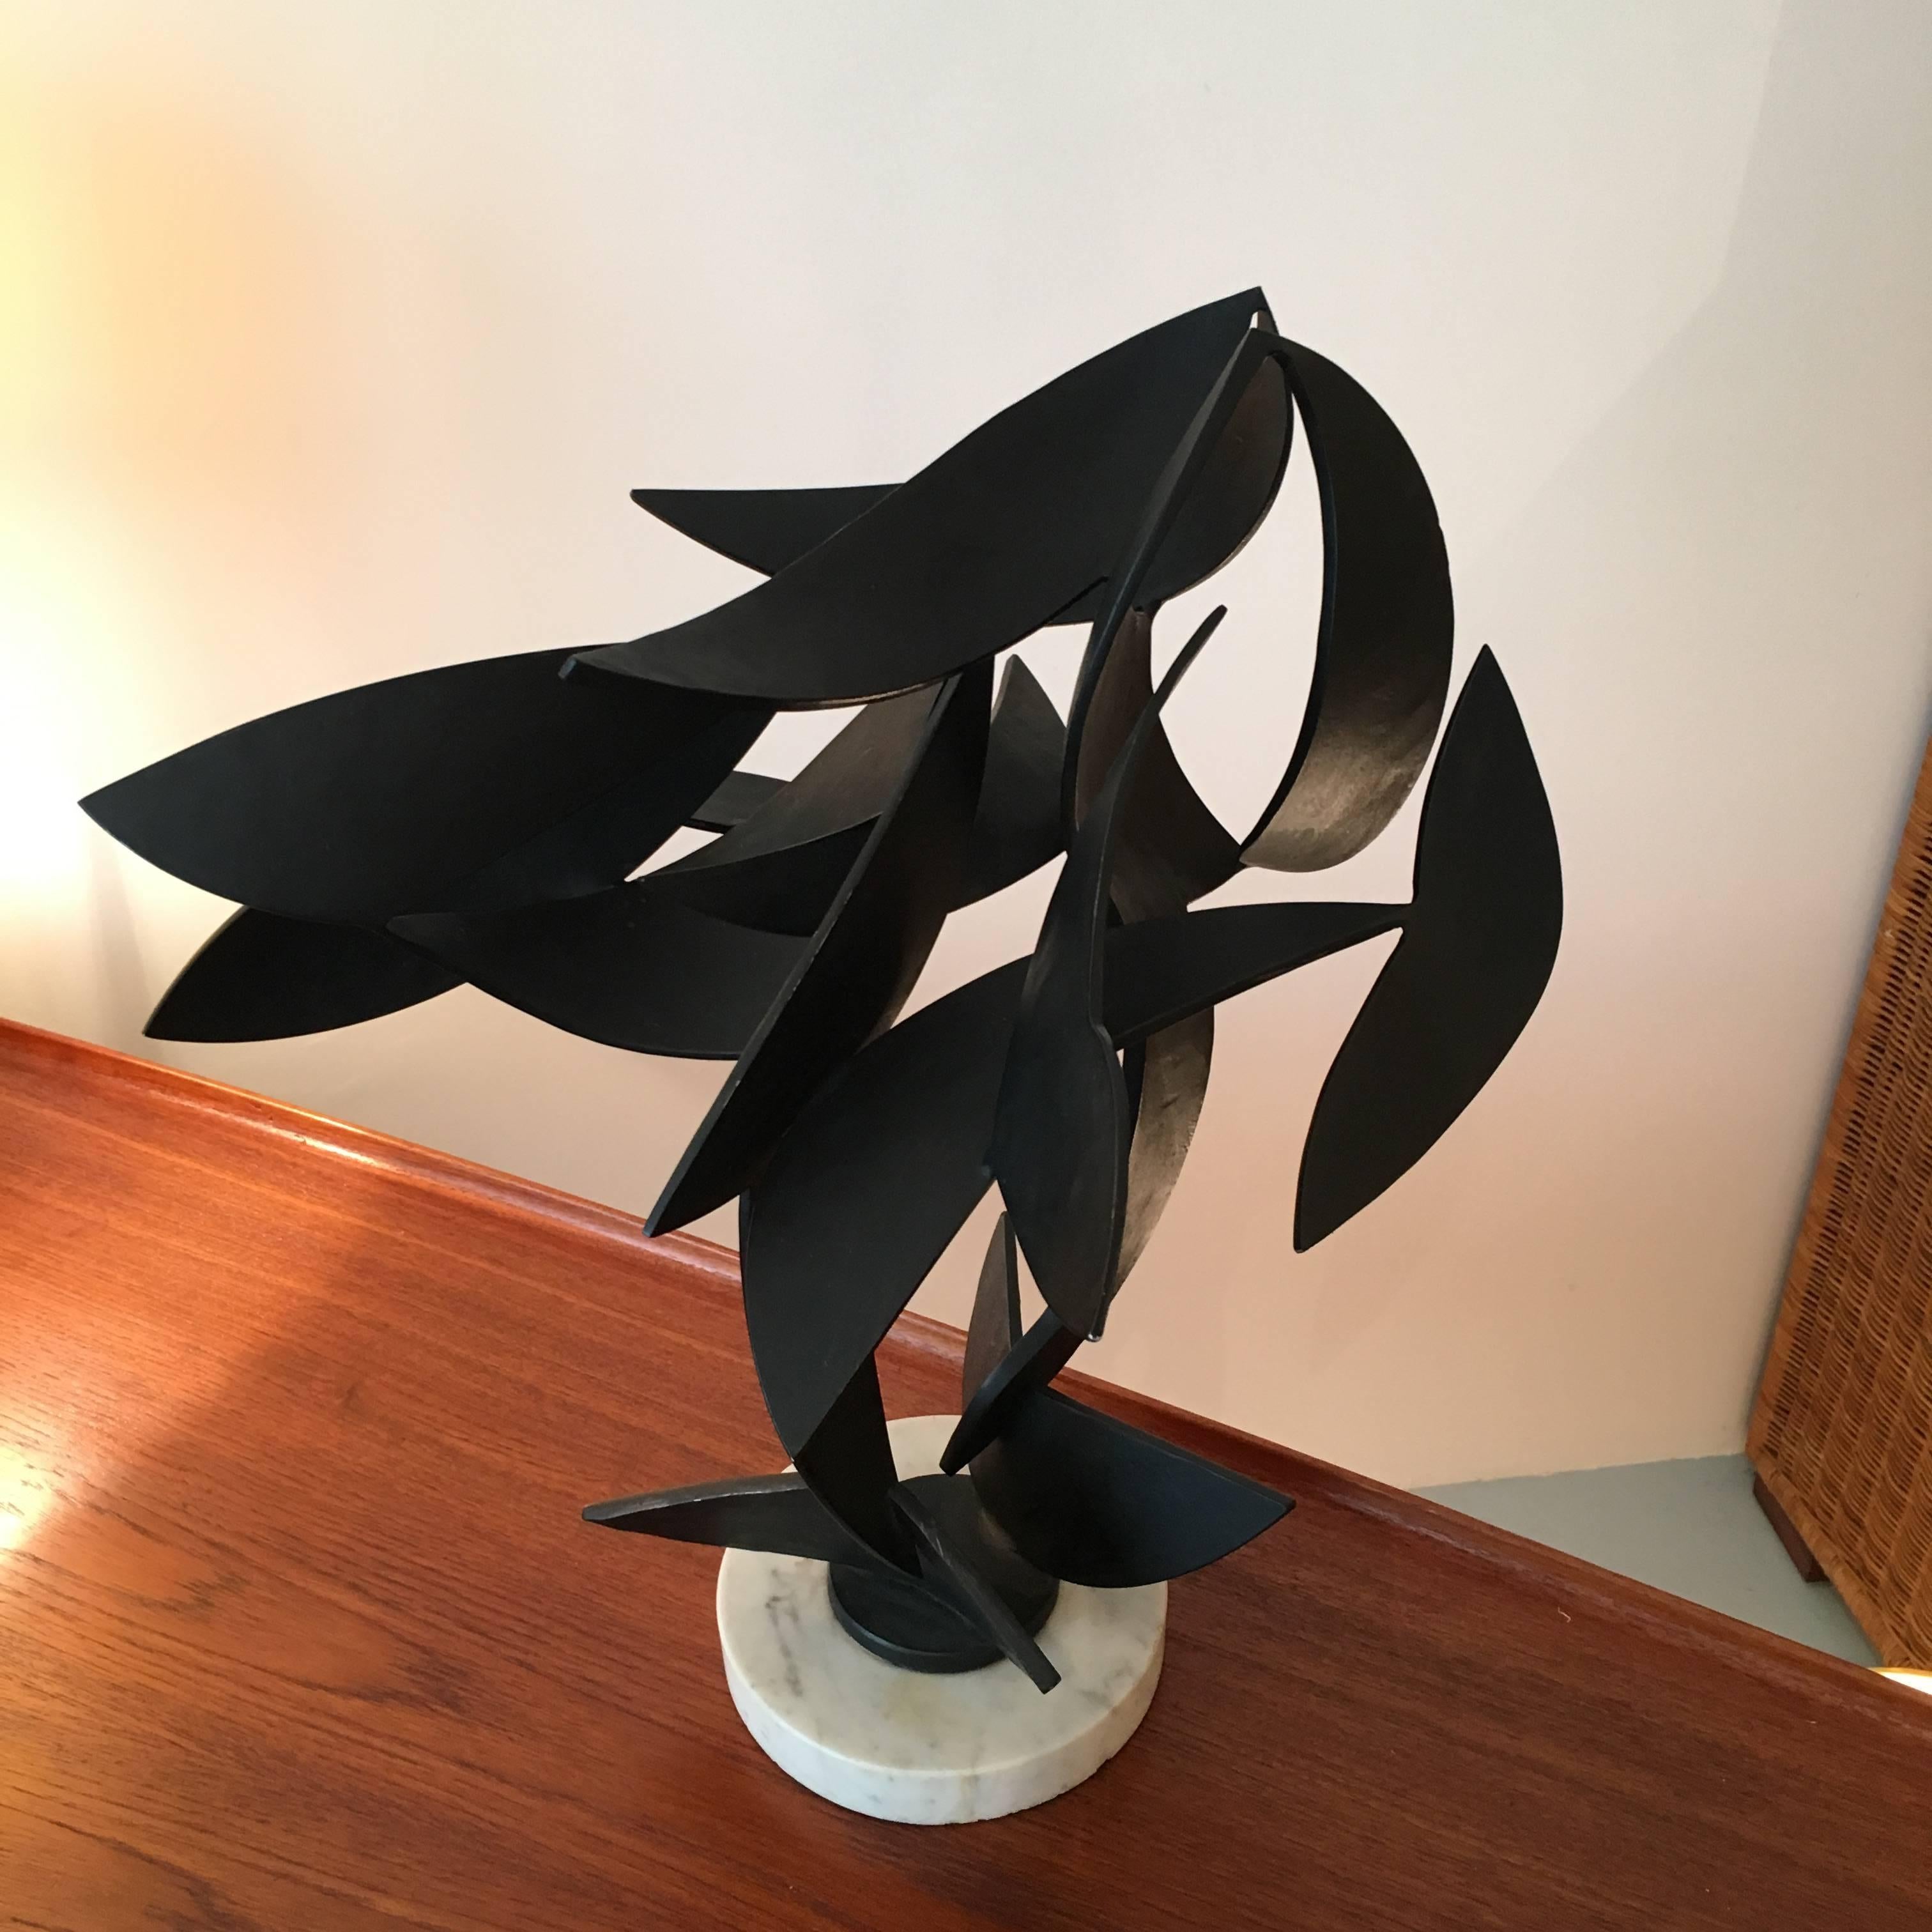 Striking abstract sculpture;
France, circa 1970.
Metal, marble.